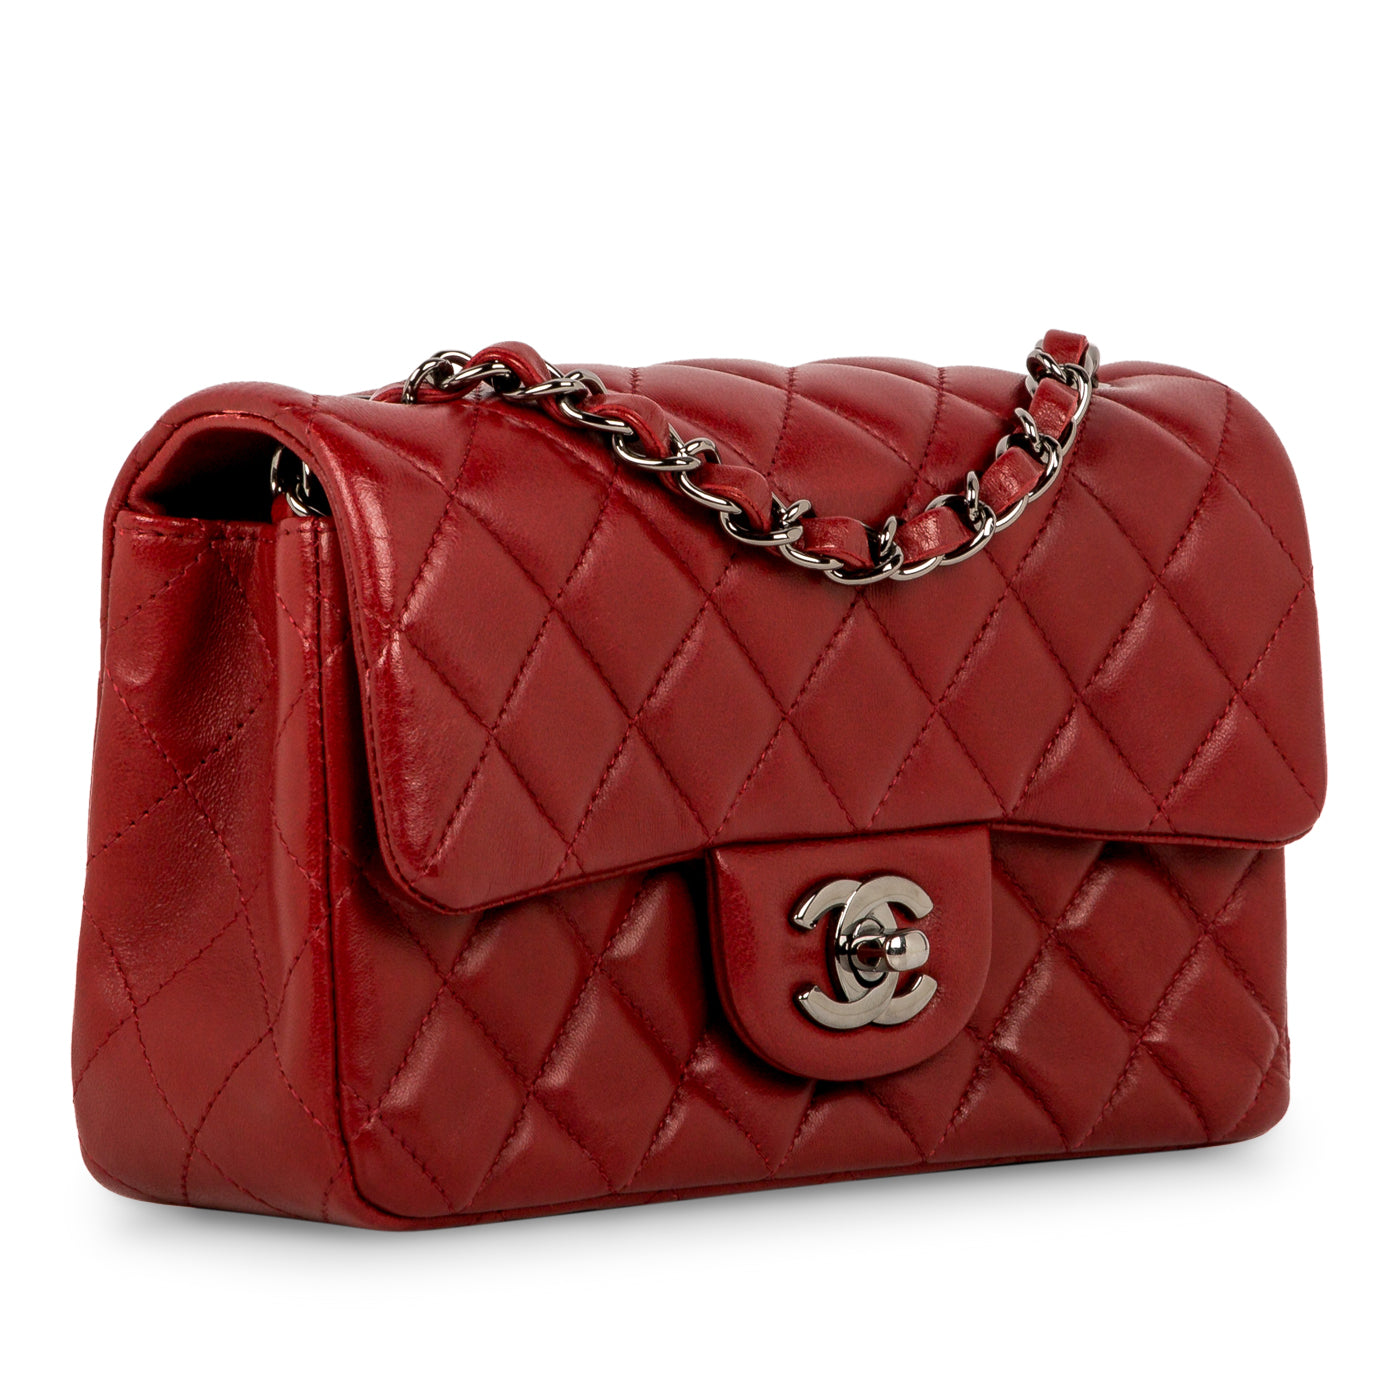 Chanel Lambskin Quilted Mini Rectangular Flap Red